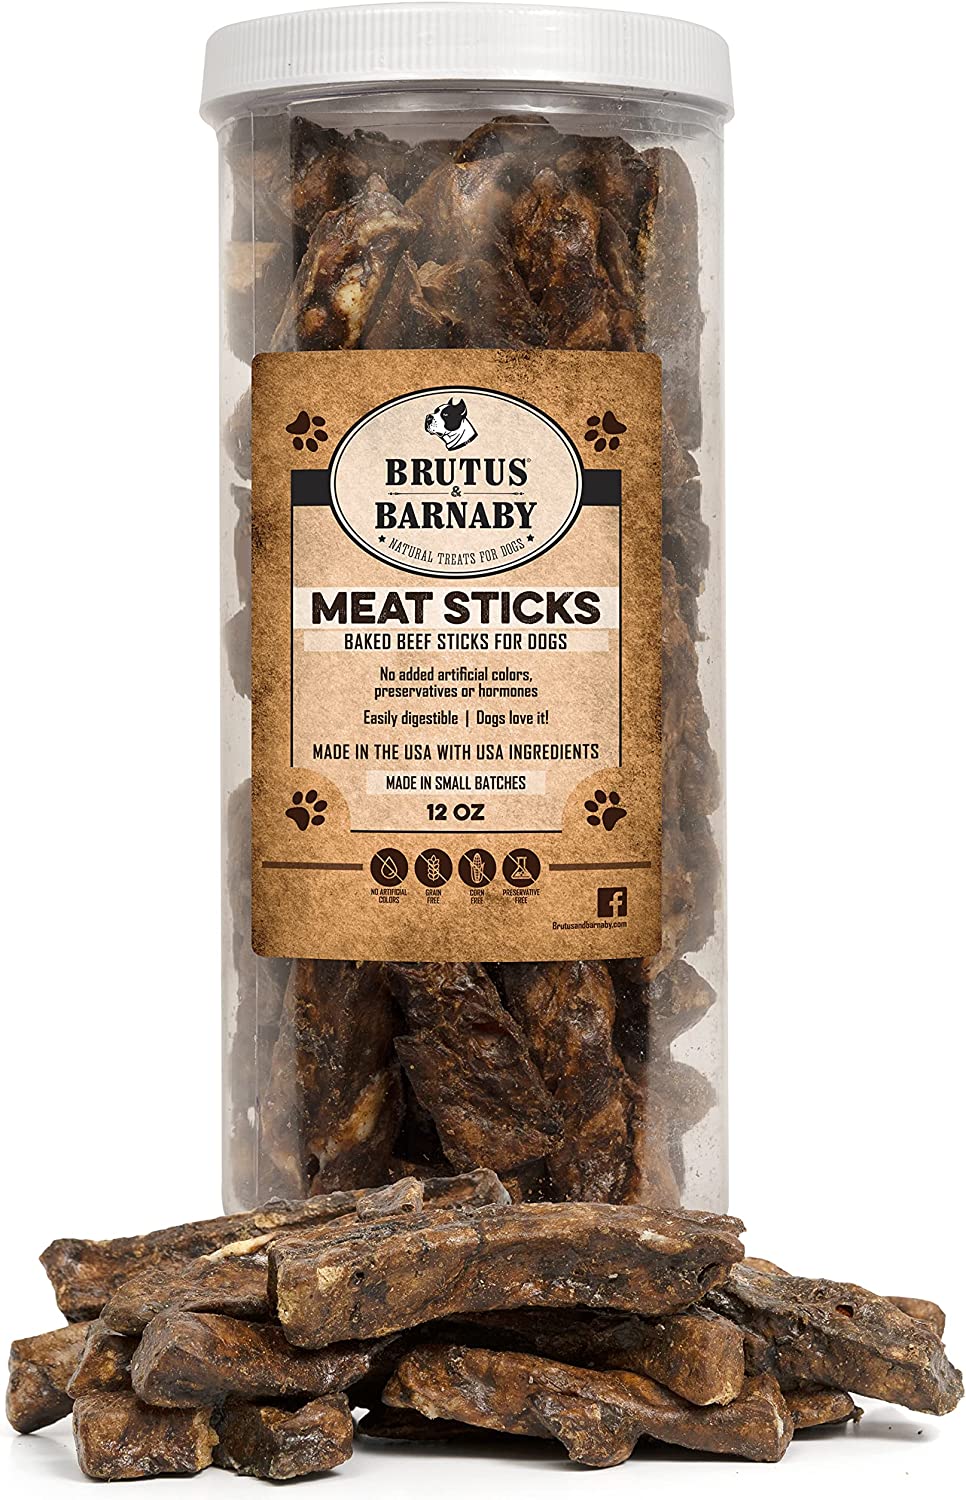 BRUTUS & BARNABY Beef Meat Sticks for Dogs – Thick & Hearty Beef Liver & Lung Dog Treat Made in USA – Protein Packed, Crunchy, Healthy Dog Treats – Grain Free, Rawhide Free, No Additives